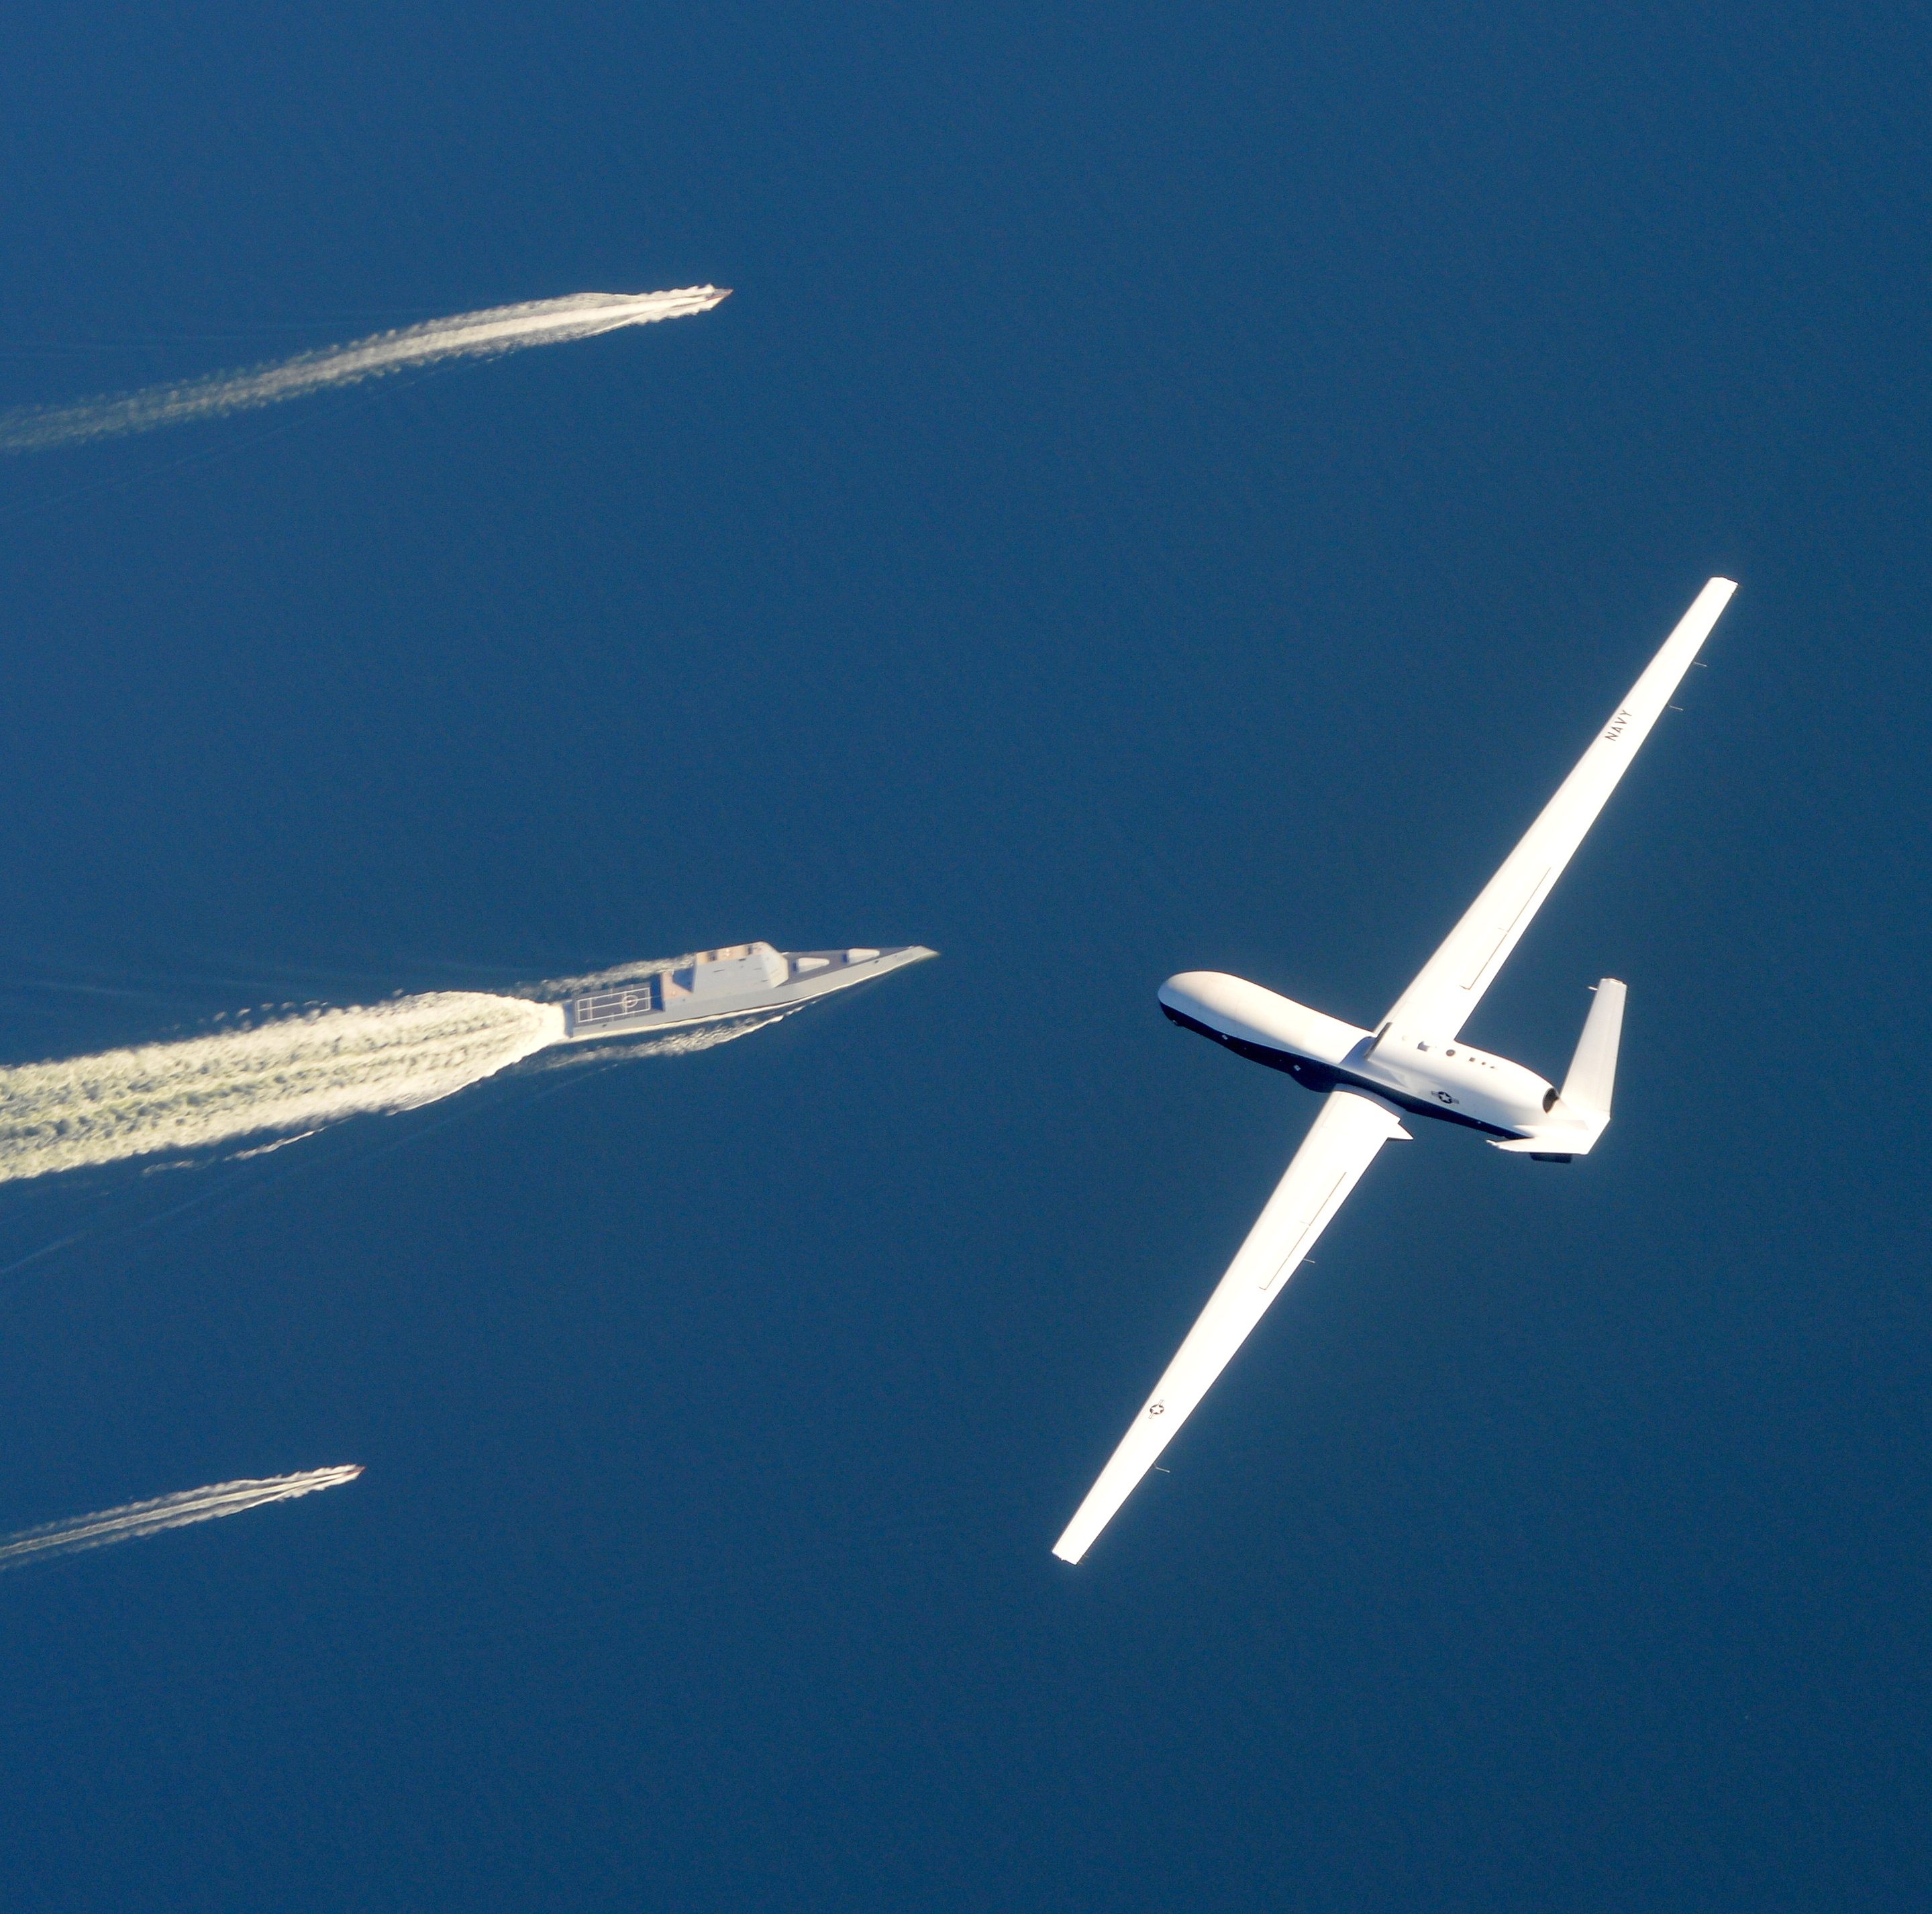 Aircraft in flight over ocean with 3 boats